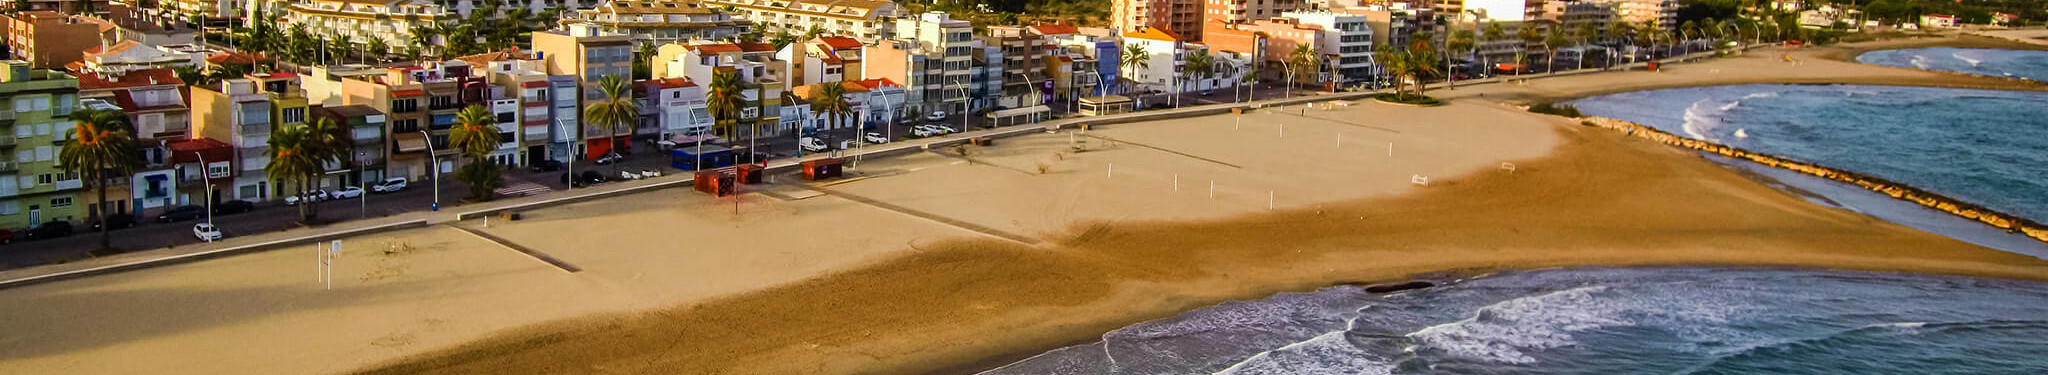 Playa Torreblanca in Fuengirola is a popular beach for families, which never gets too crowded